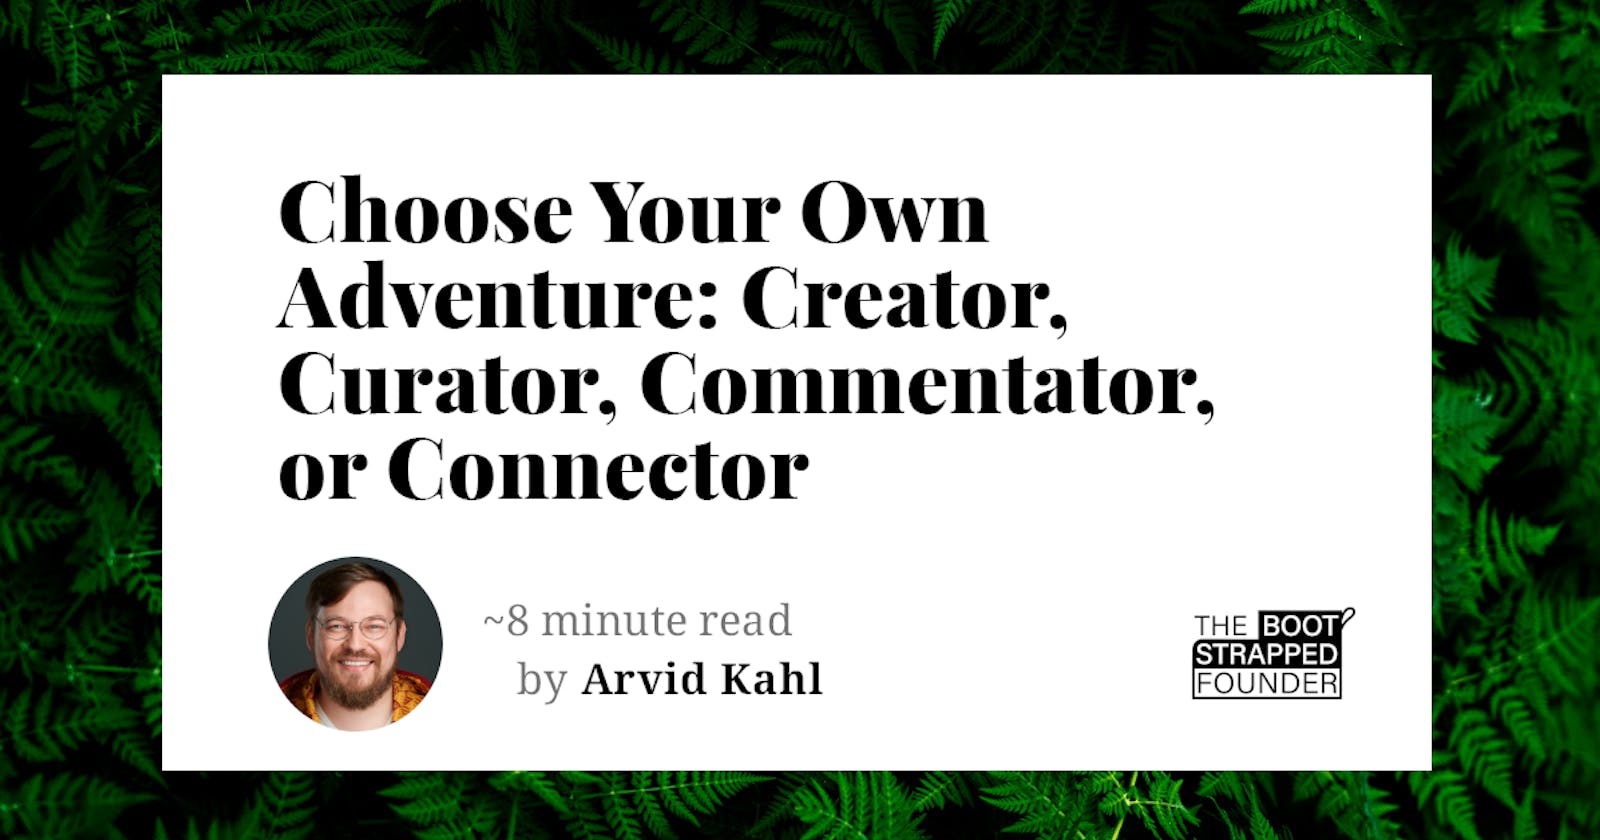 Choose Your Own Adventure: Creator, Curator, Commentator, or Connector